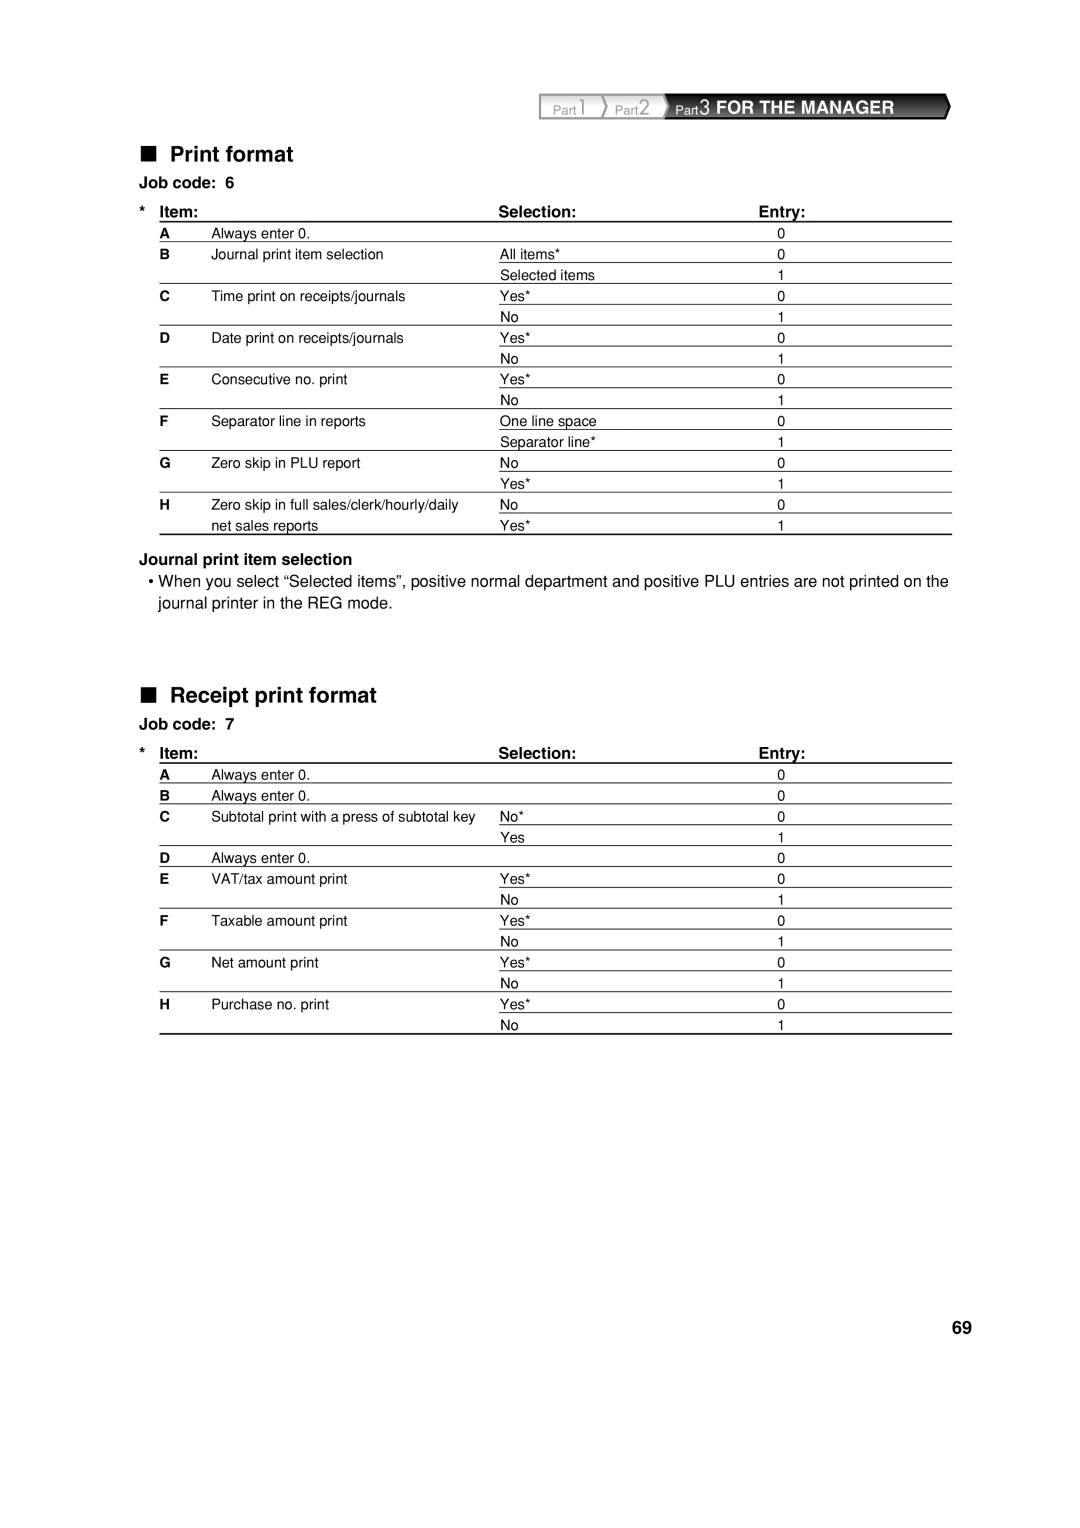 Sharp XE-A303 instruction manual Print format, Receipt print format, Part3 FOR THE MANAGER, Job code, Selection, Entry 